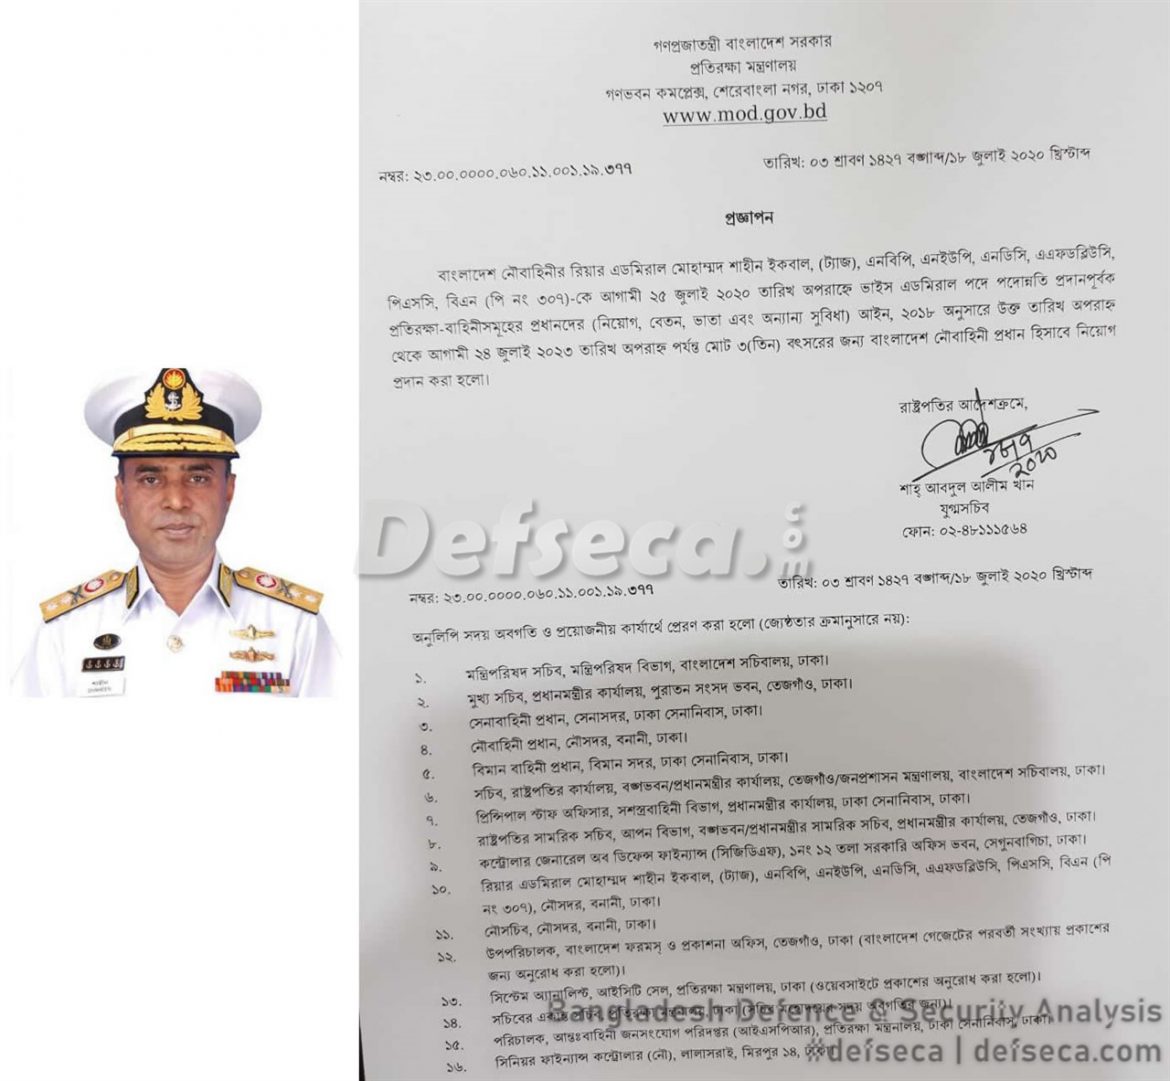 Mohammad Shaheen Iqbal promoted as CNS